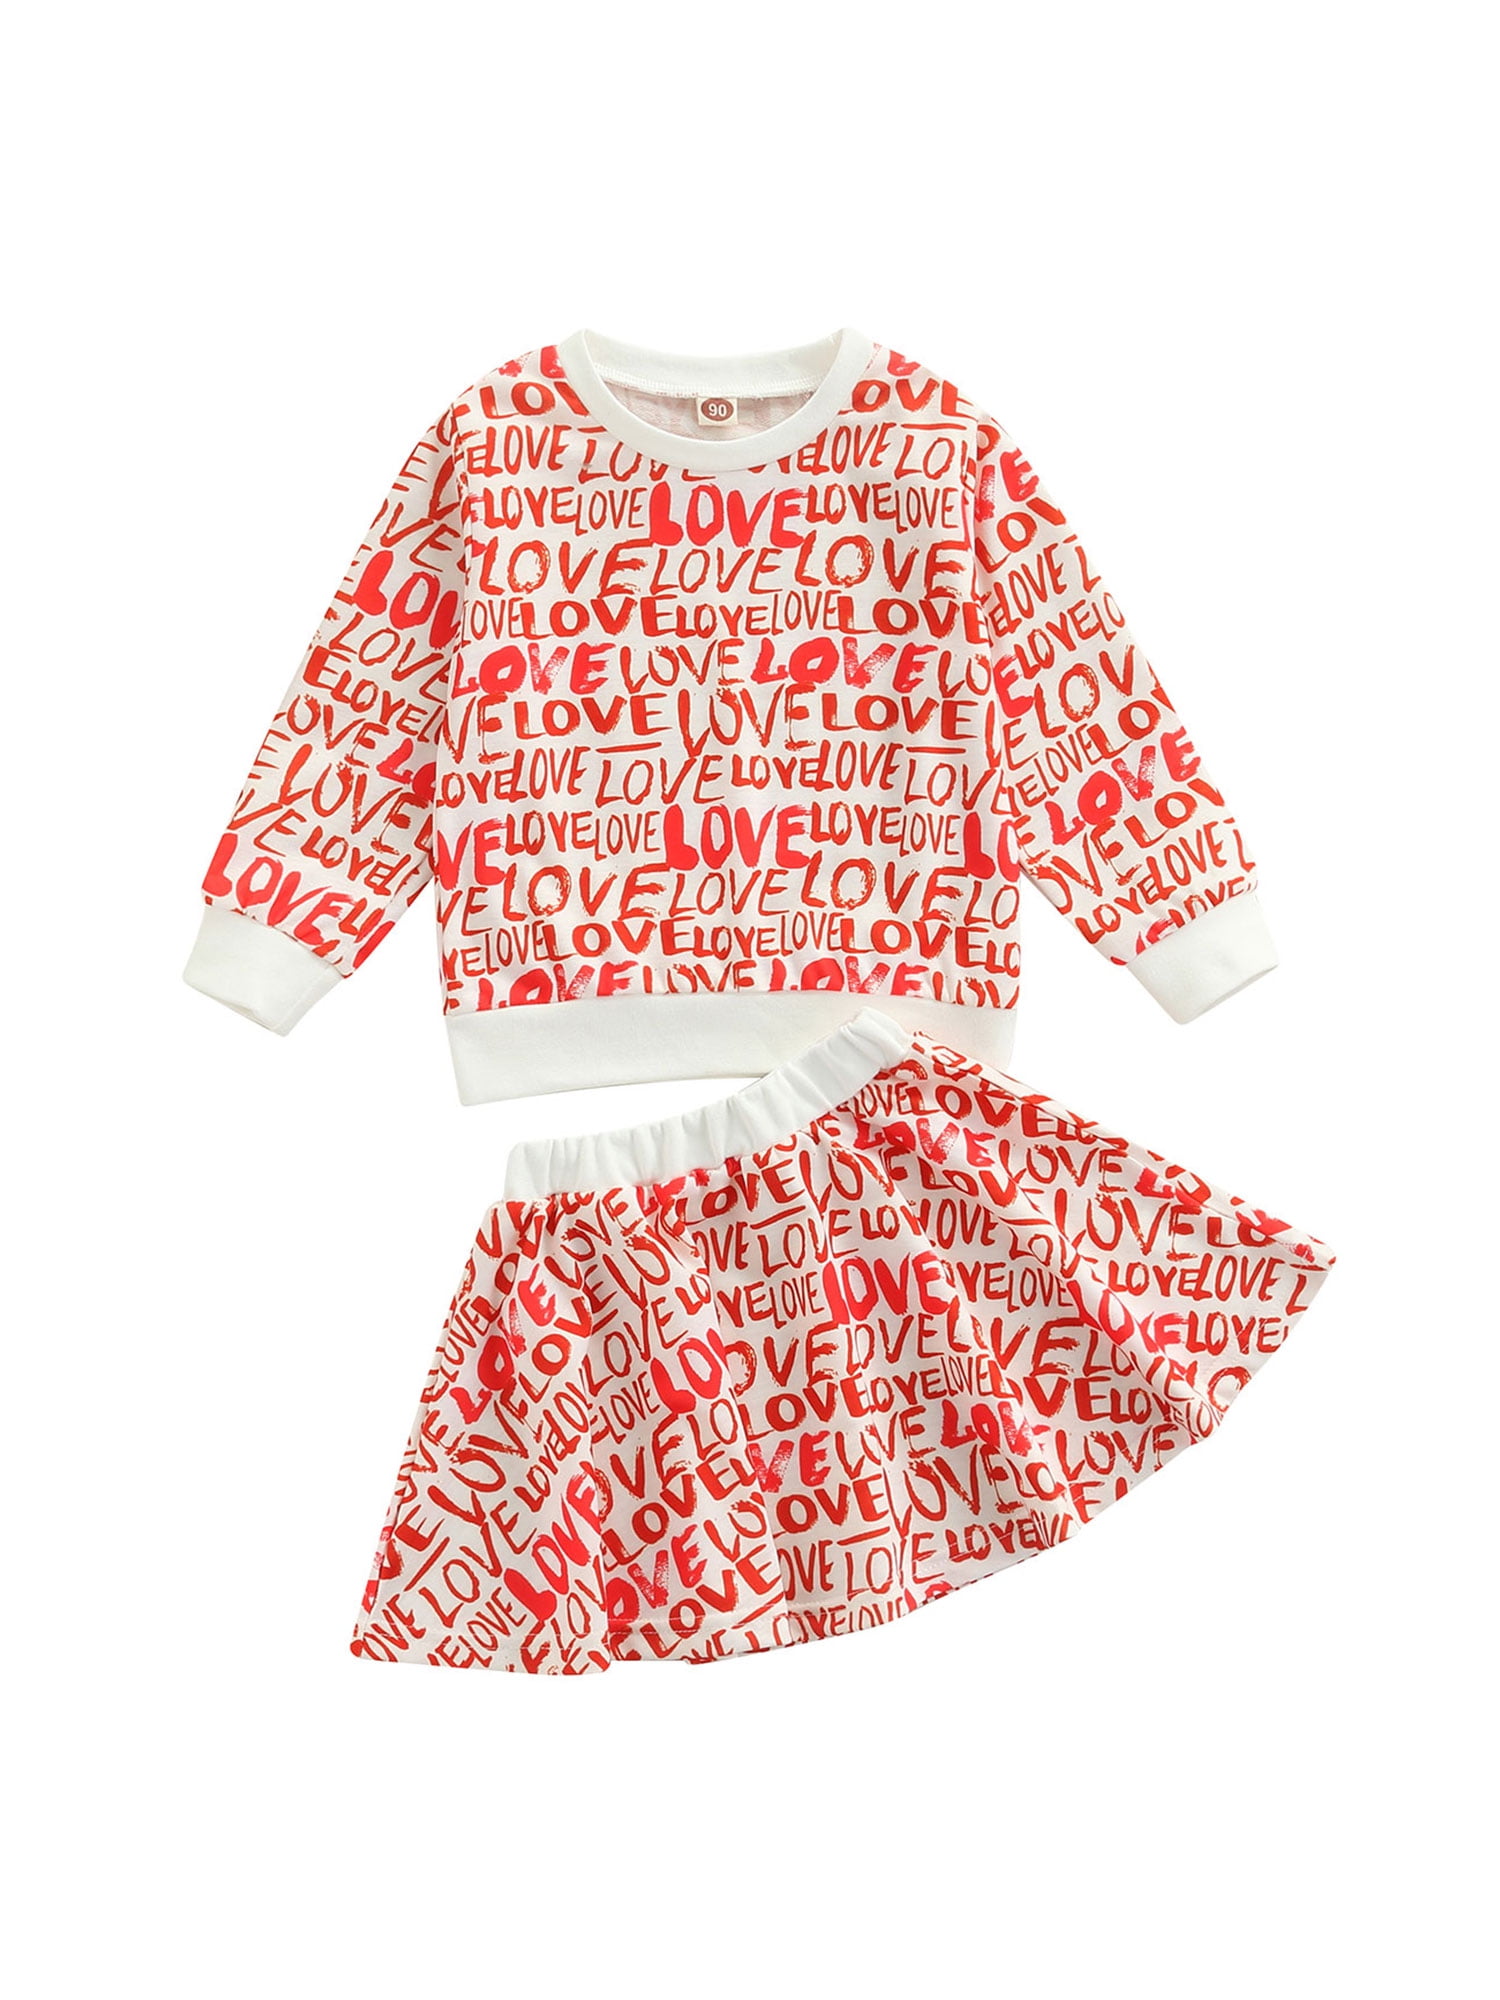 Toddler Baby Girls Valentine's Day Pullover Love Printing Tops Skirt Outfits Set 